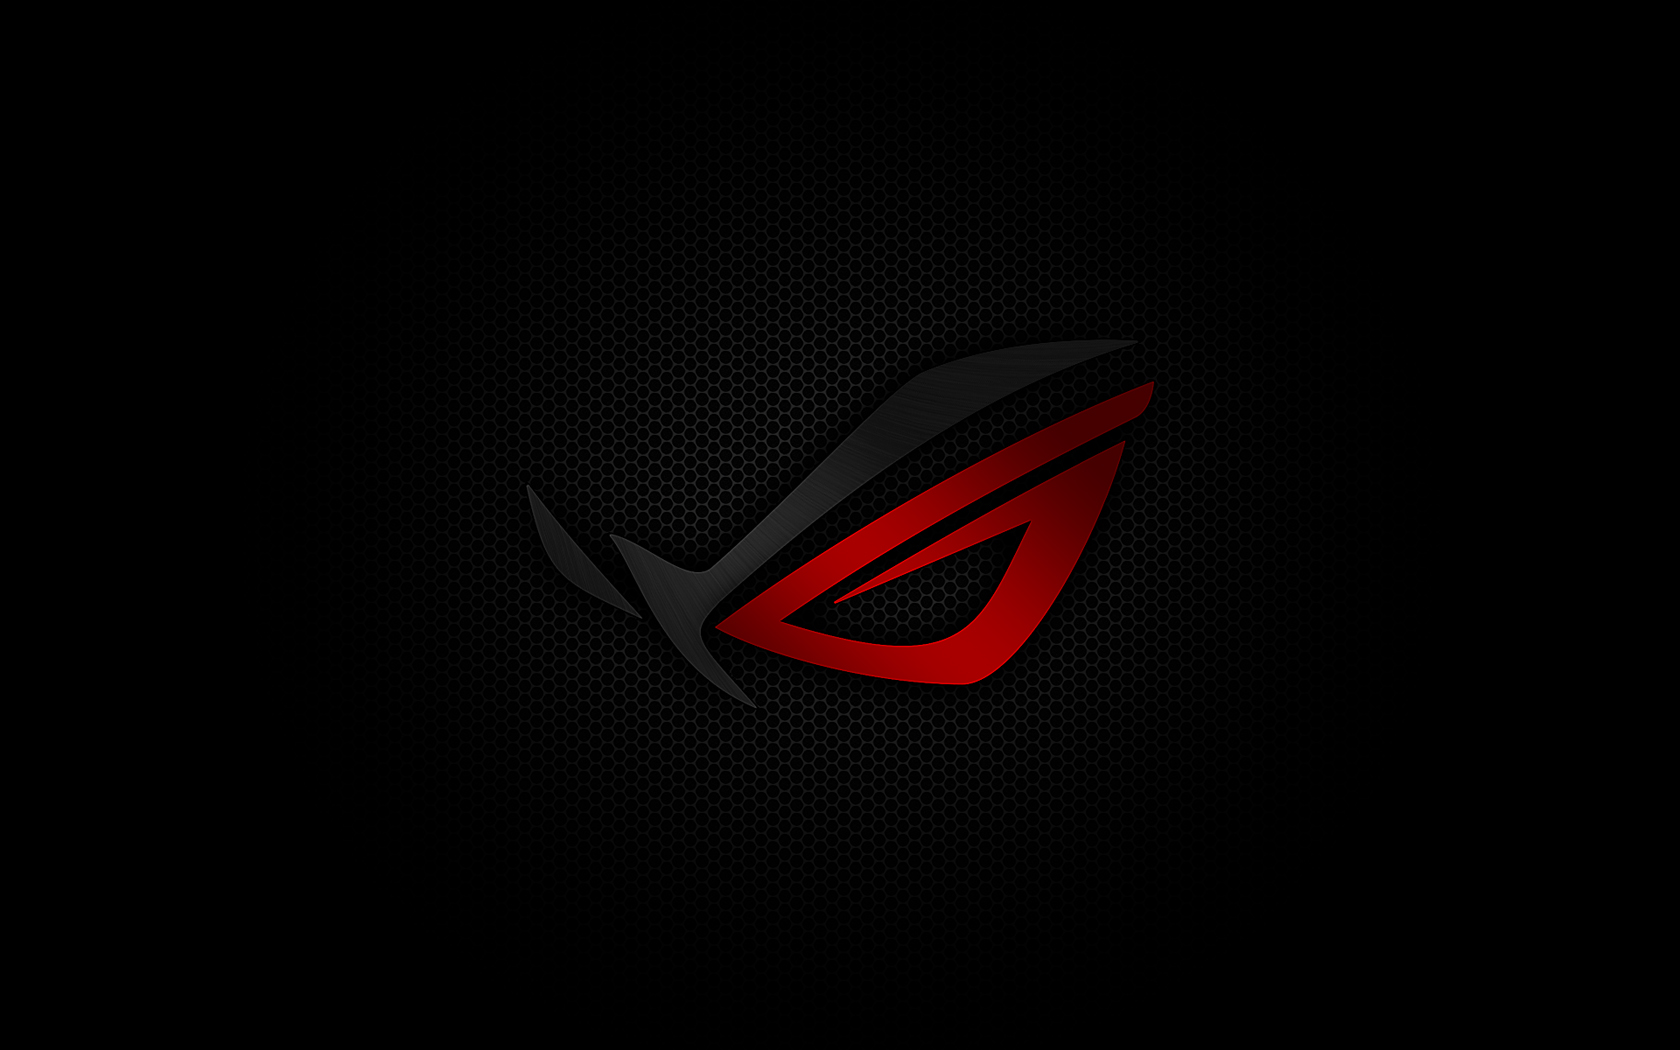 Asus Rog Wallpaper Collection